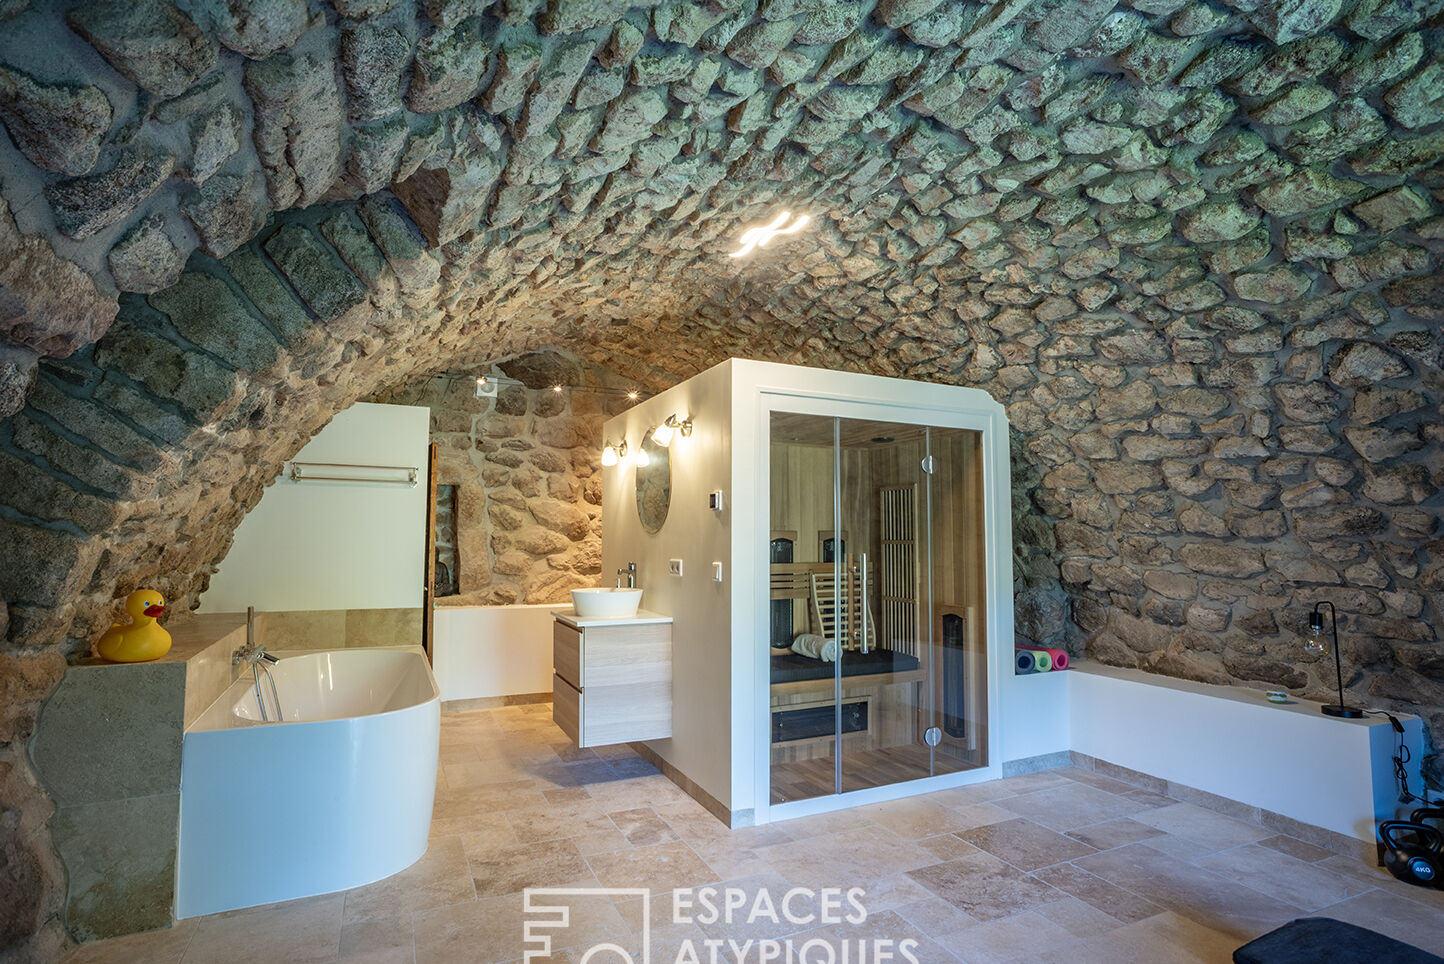 Authentic restored stone house overlooking 16 hectares of land